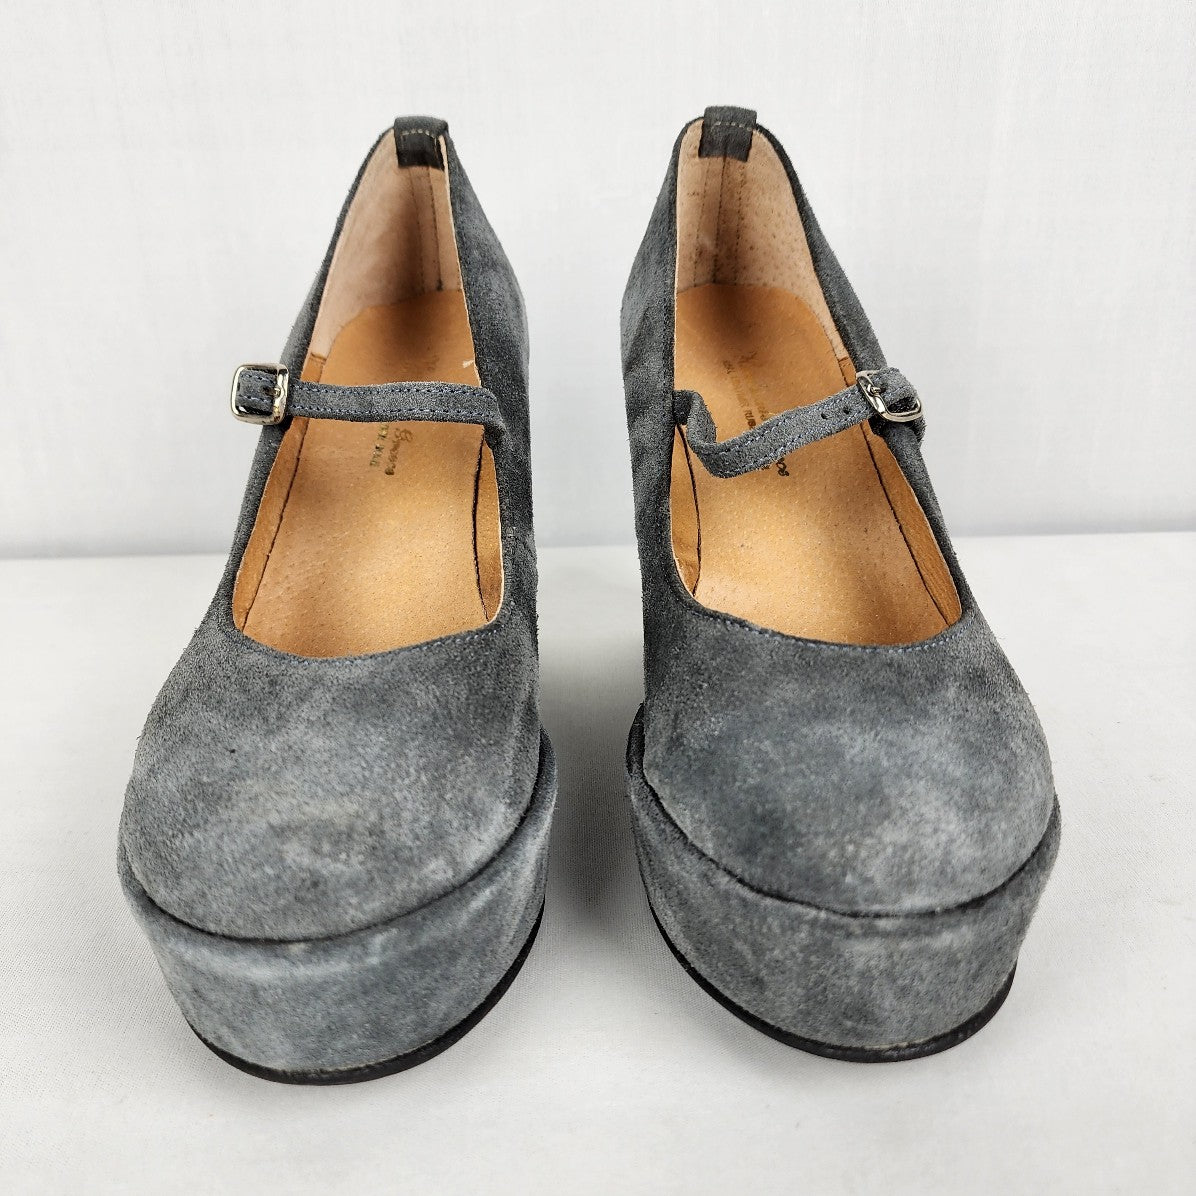 Handmade In Greece Grey Suede Wedge Platform Mary Jane Shoes Size 9